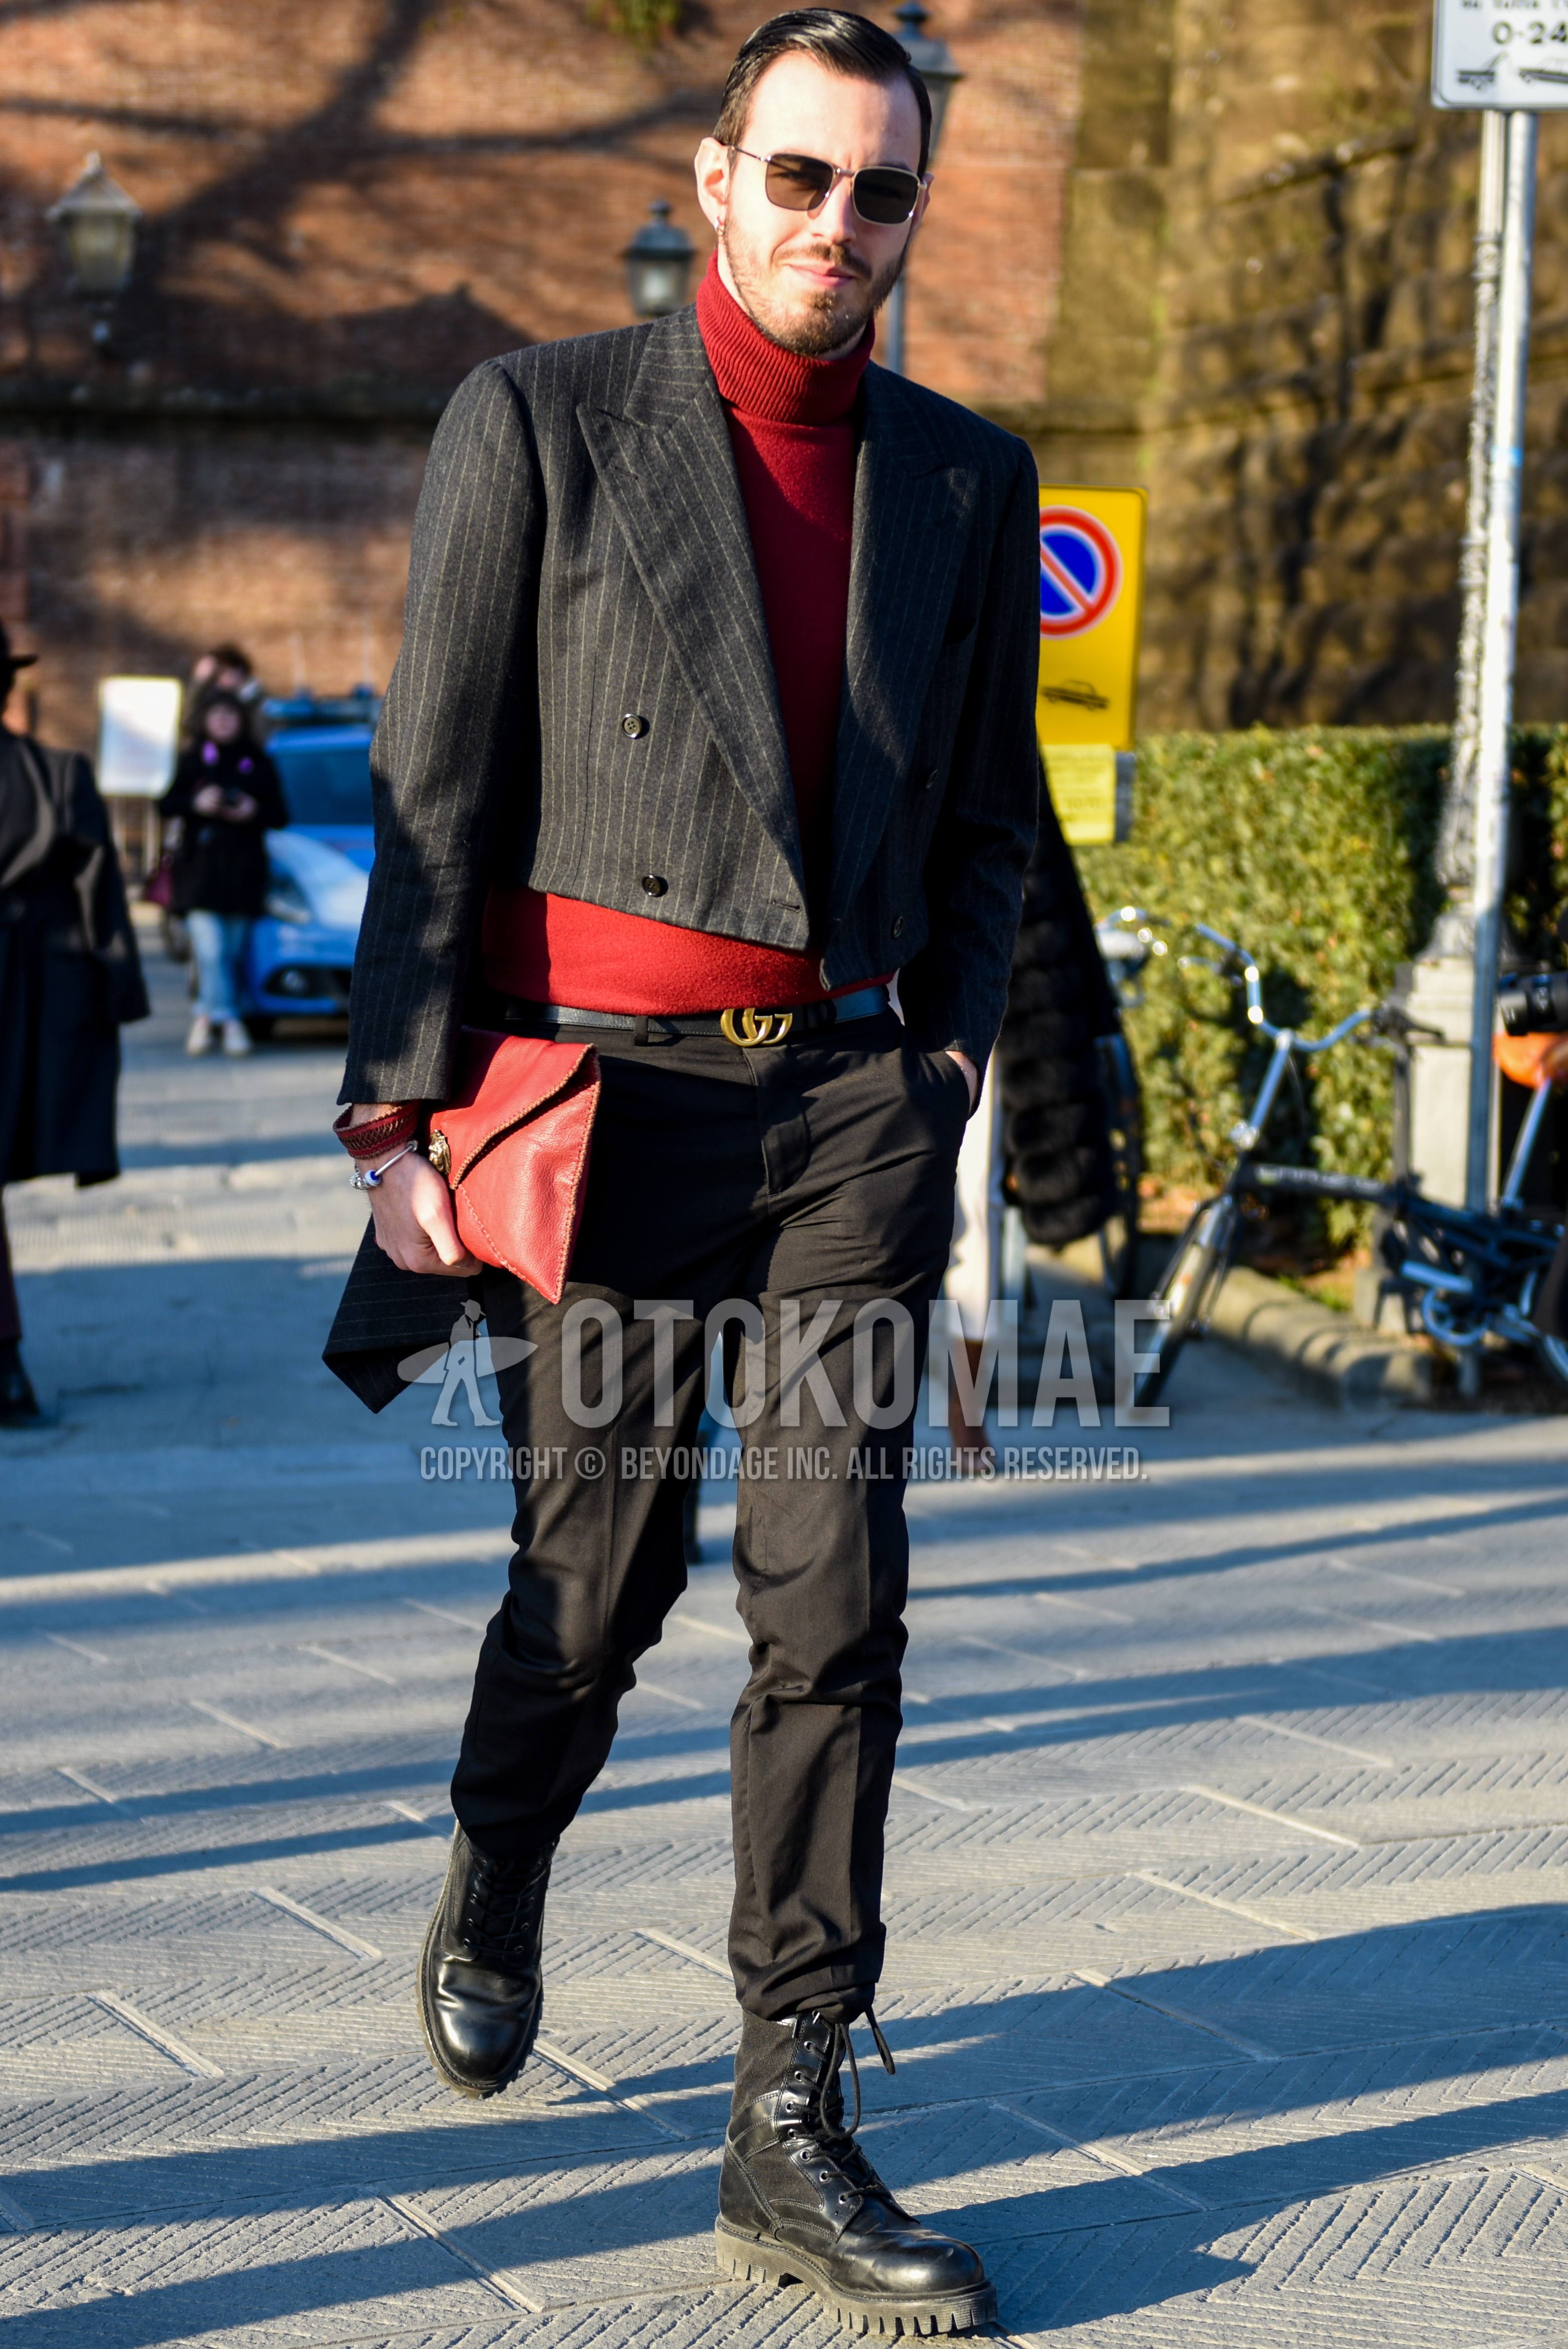 Men's autumn winter outfit with silver plain sunglasses, dark gray stripes tailored jacket, red plain turtleneck knit, black one point leather belt, black plain slacks, black work boots, red plain clutch bag/second bag/drawstring bag.